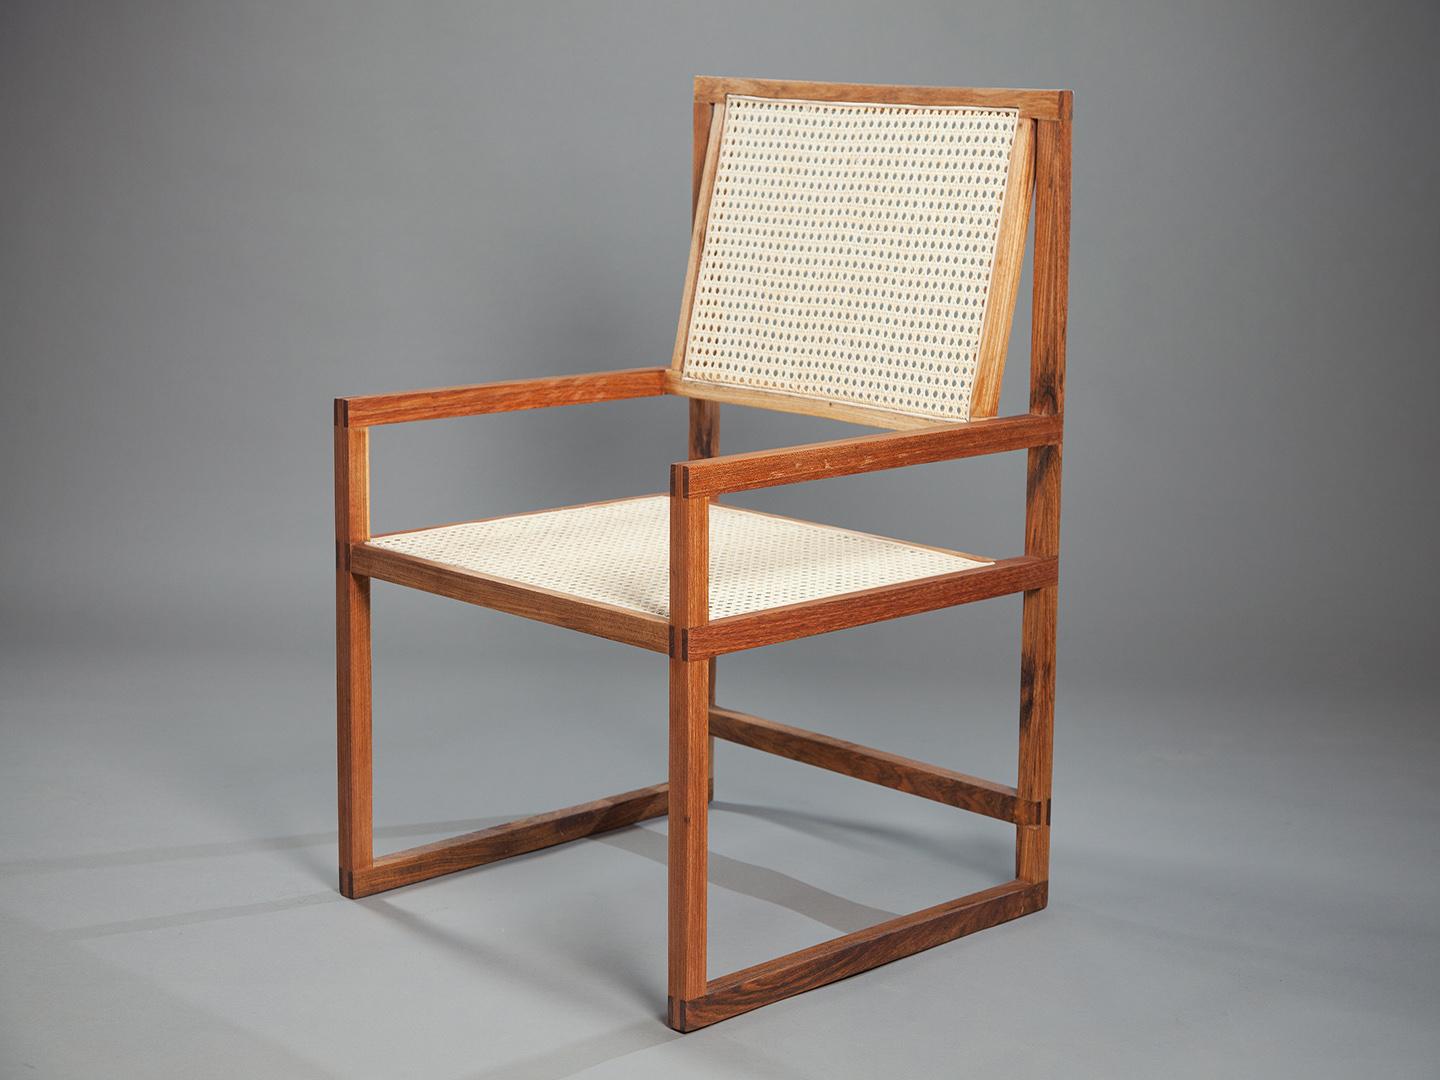 The first piece of the Square Series, it is a light and airy item with straight lines and angles. Made from Freijó wood, it's highly comfortable and durable. The seat and backrest are crafted from natural Indian straw. It can also be produced in